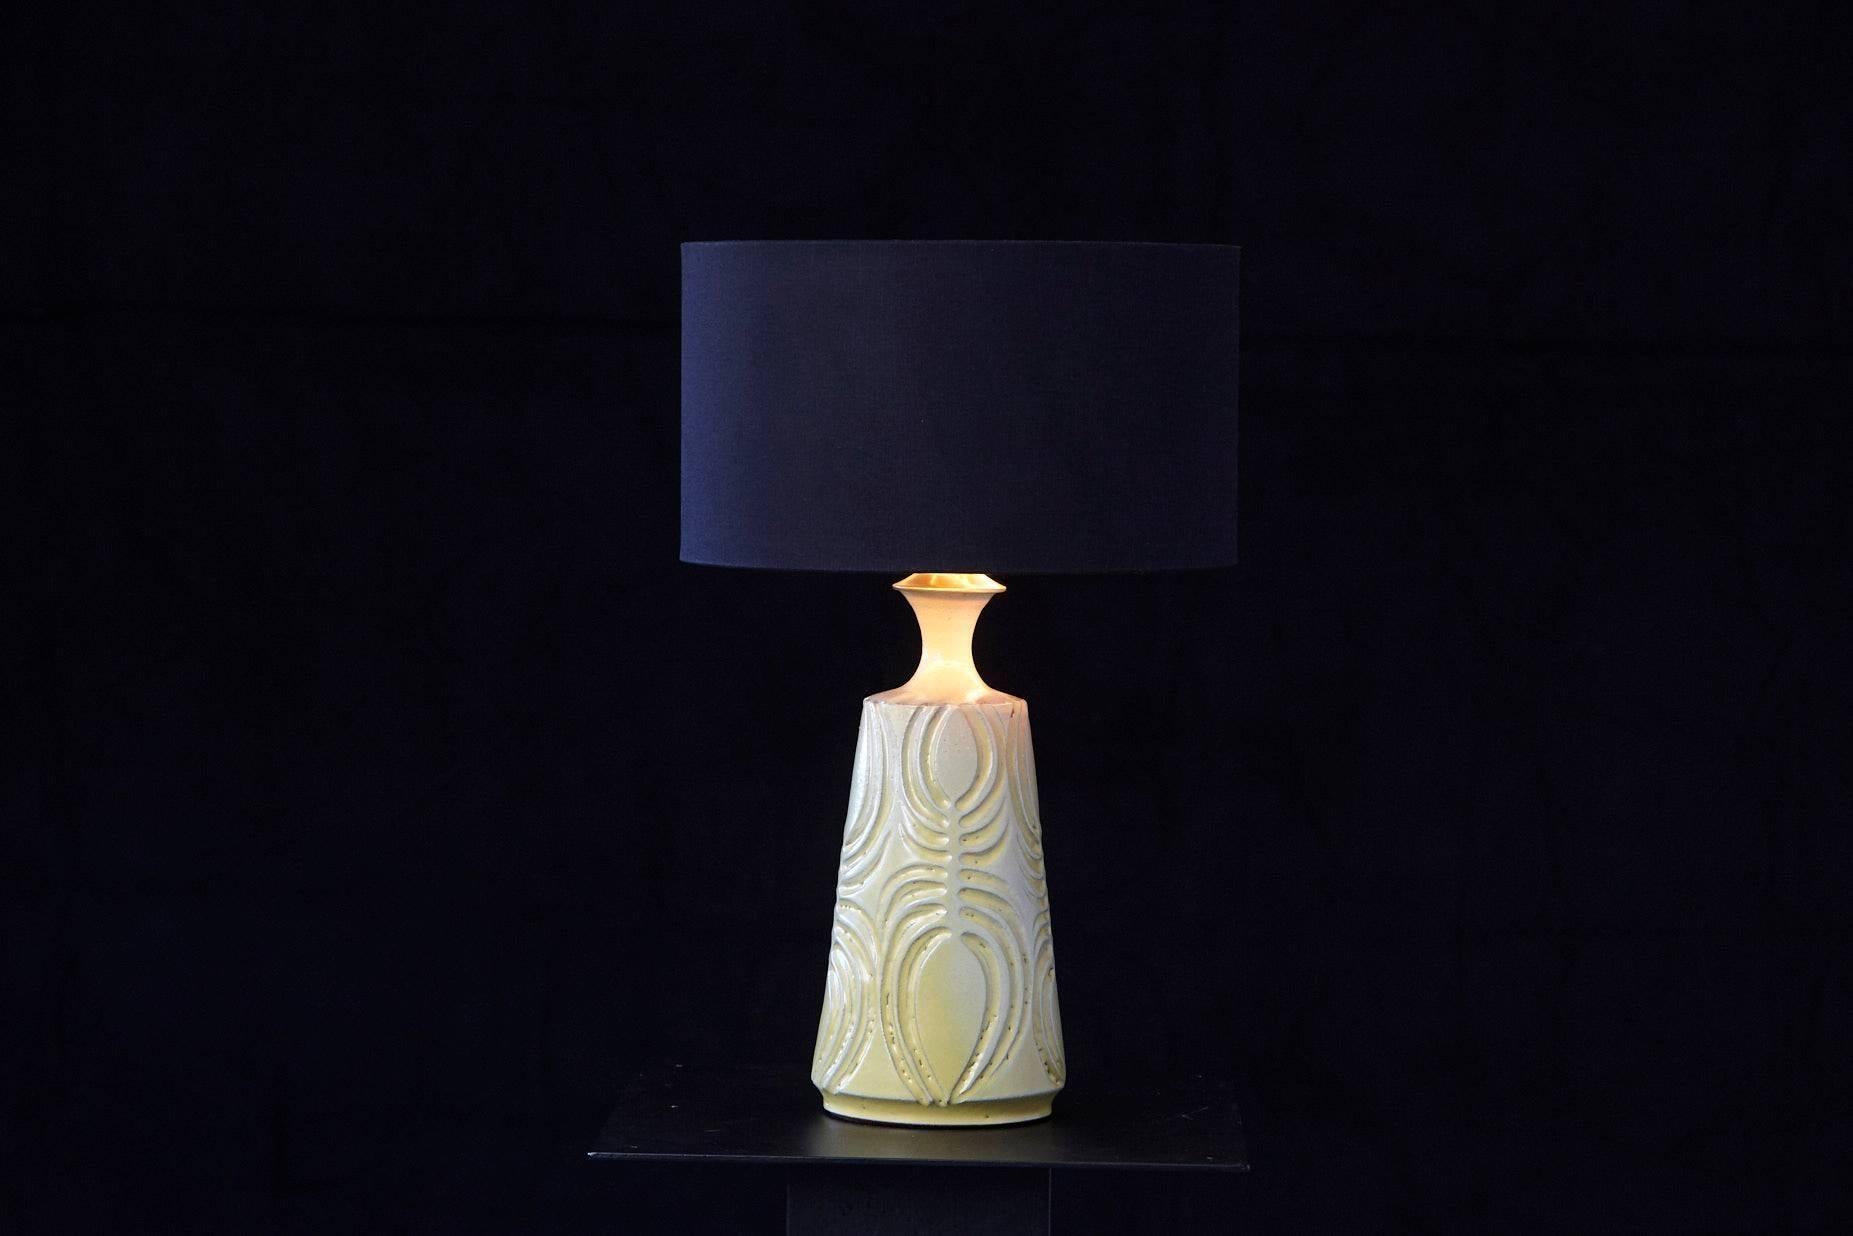 Gorgeous hand thrown ceramic lamp with a yellow glaze in from of a vase with tapering neck and flared rim. Deeply incised decorative lines. Hand-incised mark on the inside of the lamp, Robert Maxwell '71.
The lamp came with a pre-drilled hole for